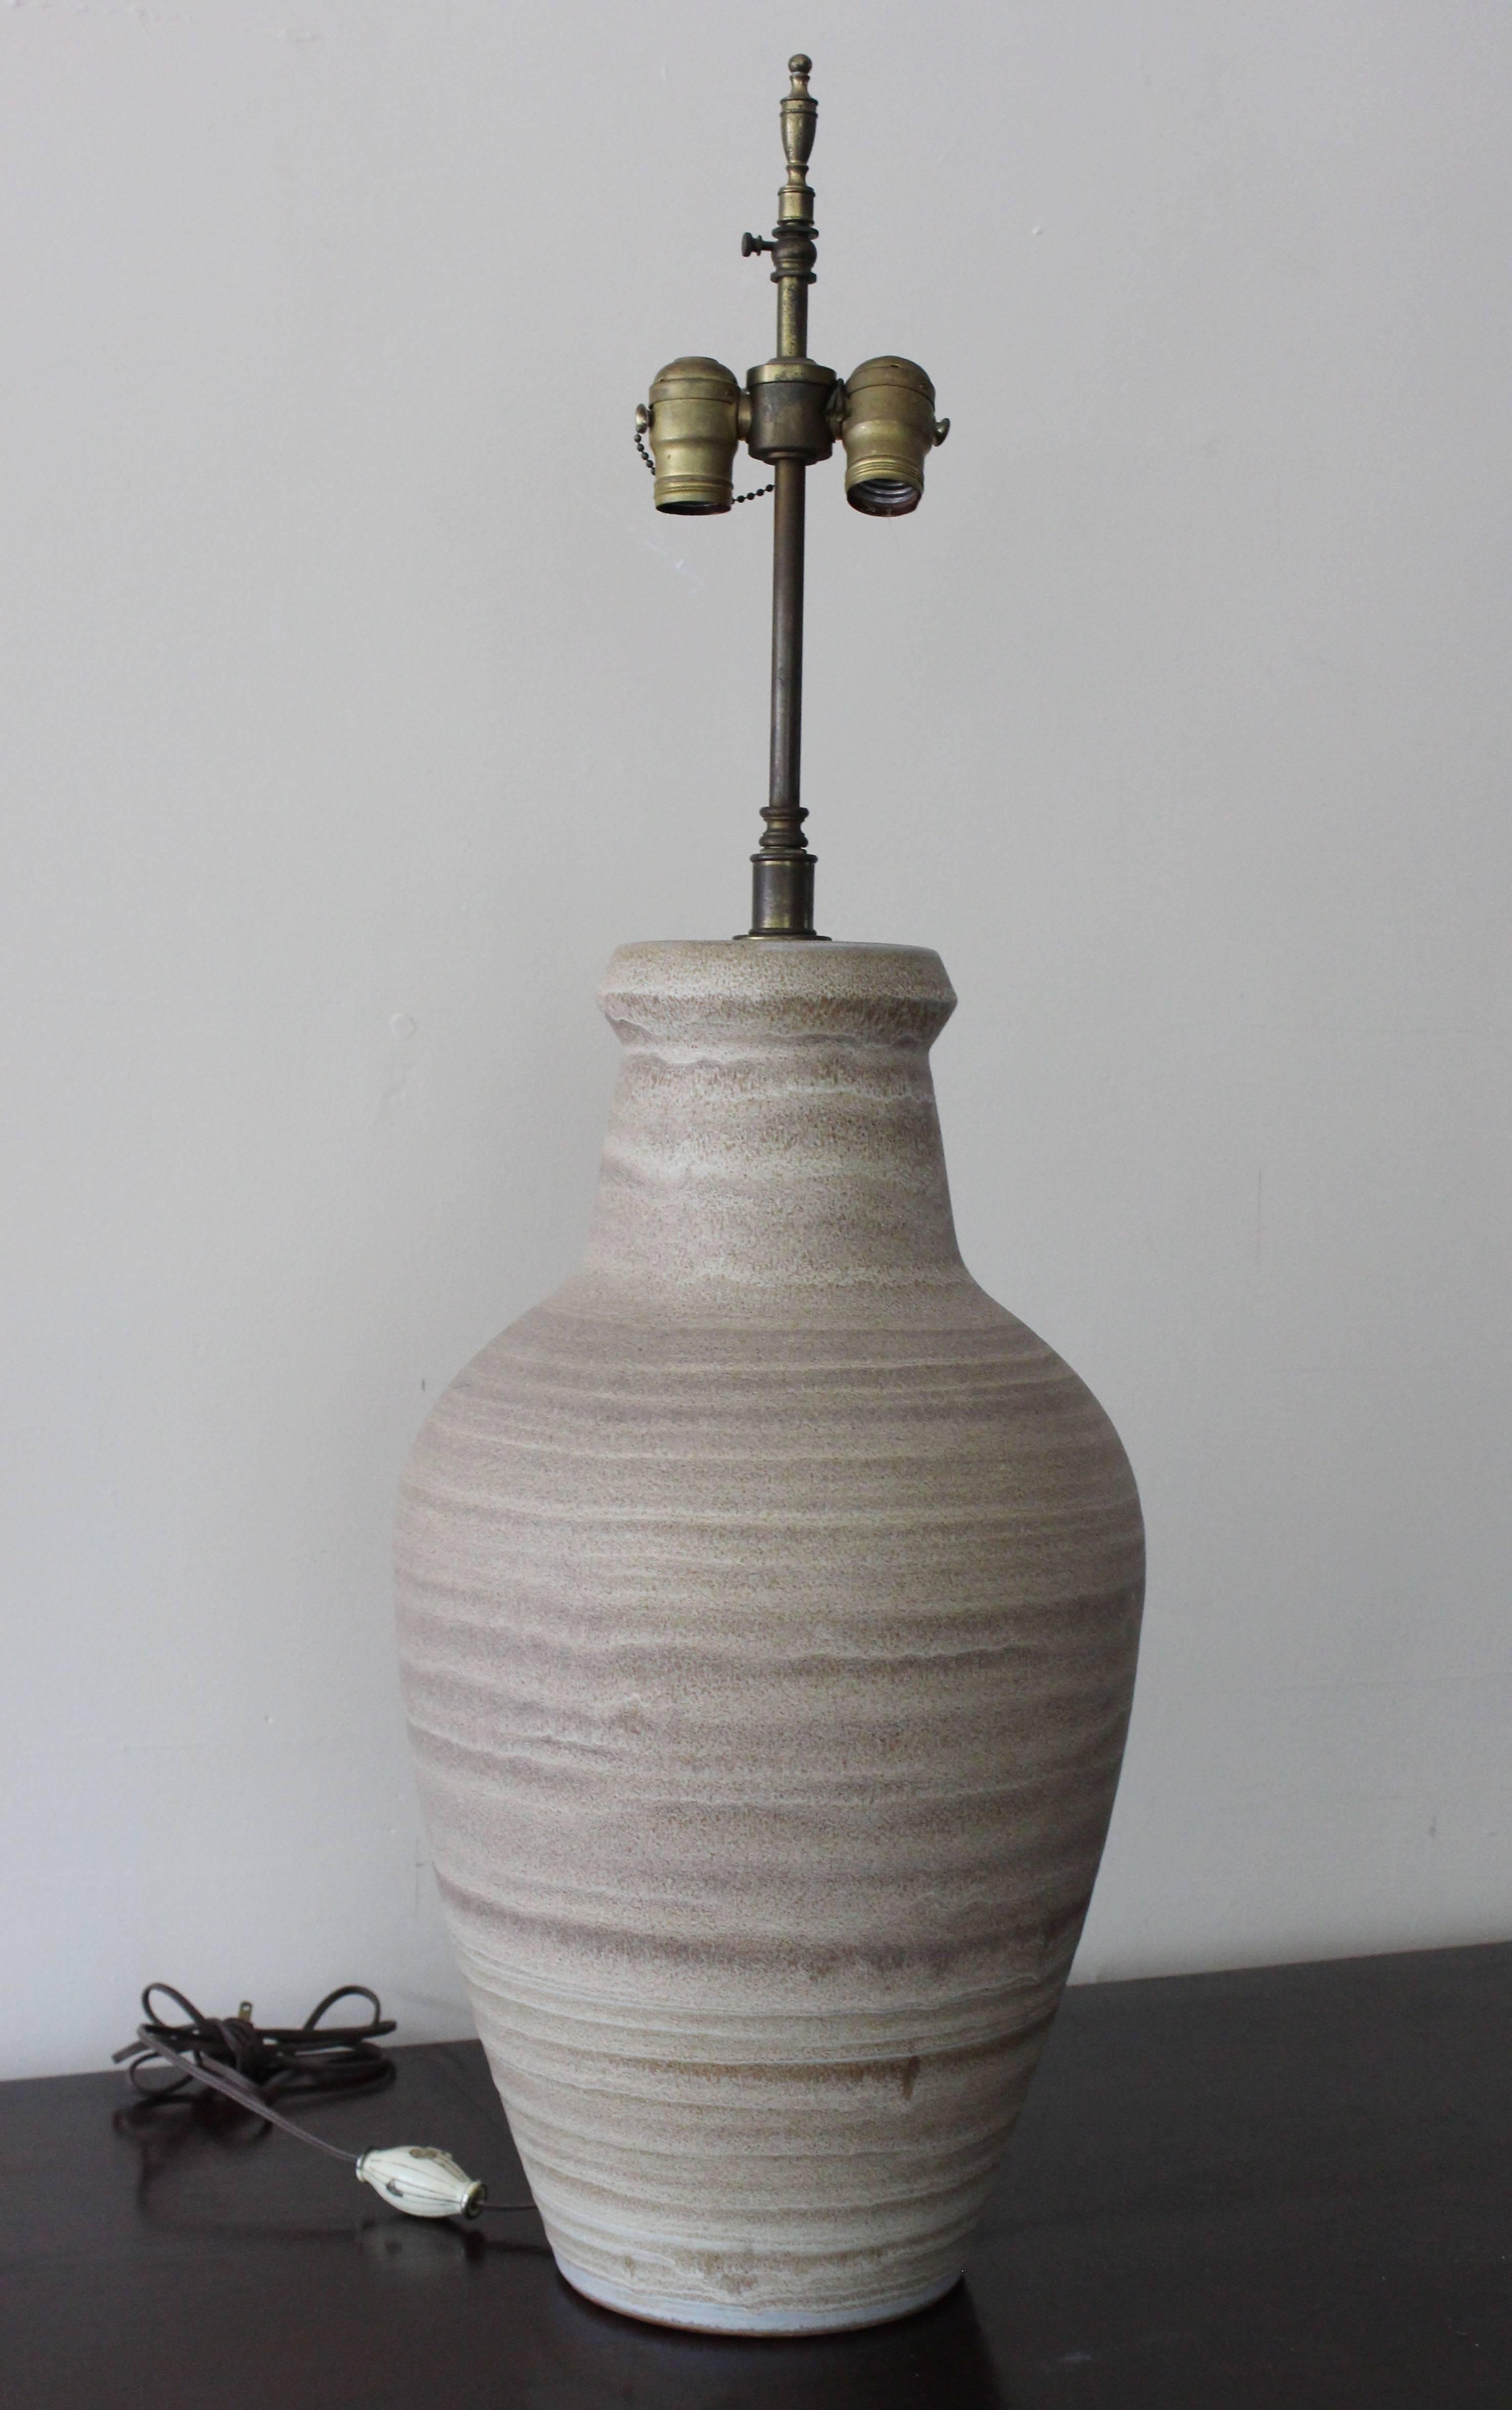 A large terra cotta lamp, matte glazed with earth tones; patinated brass hardware; double sockets and adjustable shade stem.

Base is 22.5 inches high.

        